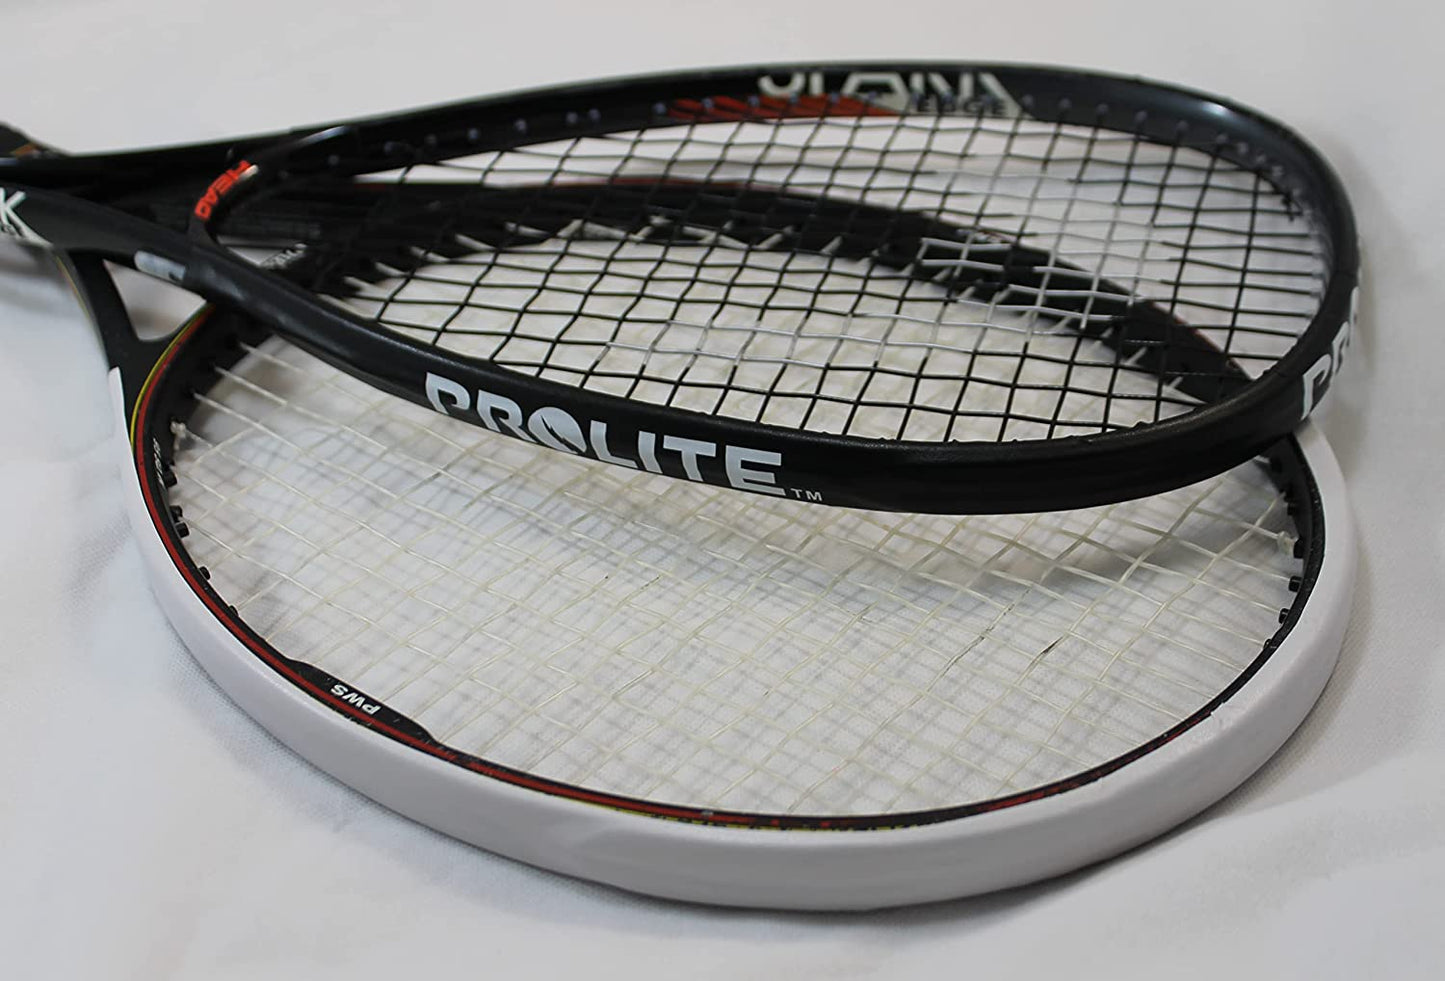 Edge Tape Armor (Wide) for All Court Sports Racquets